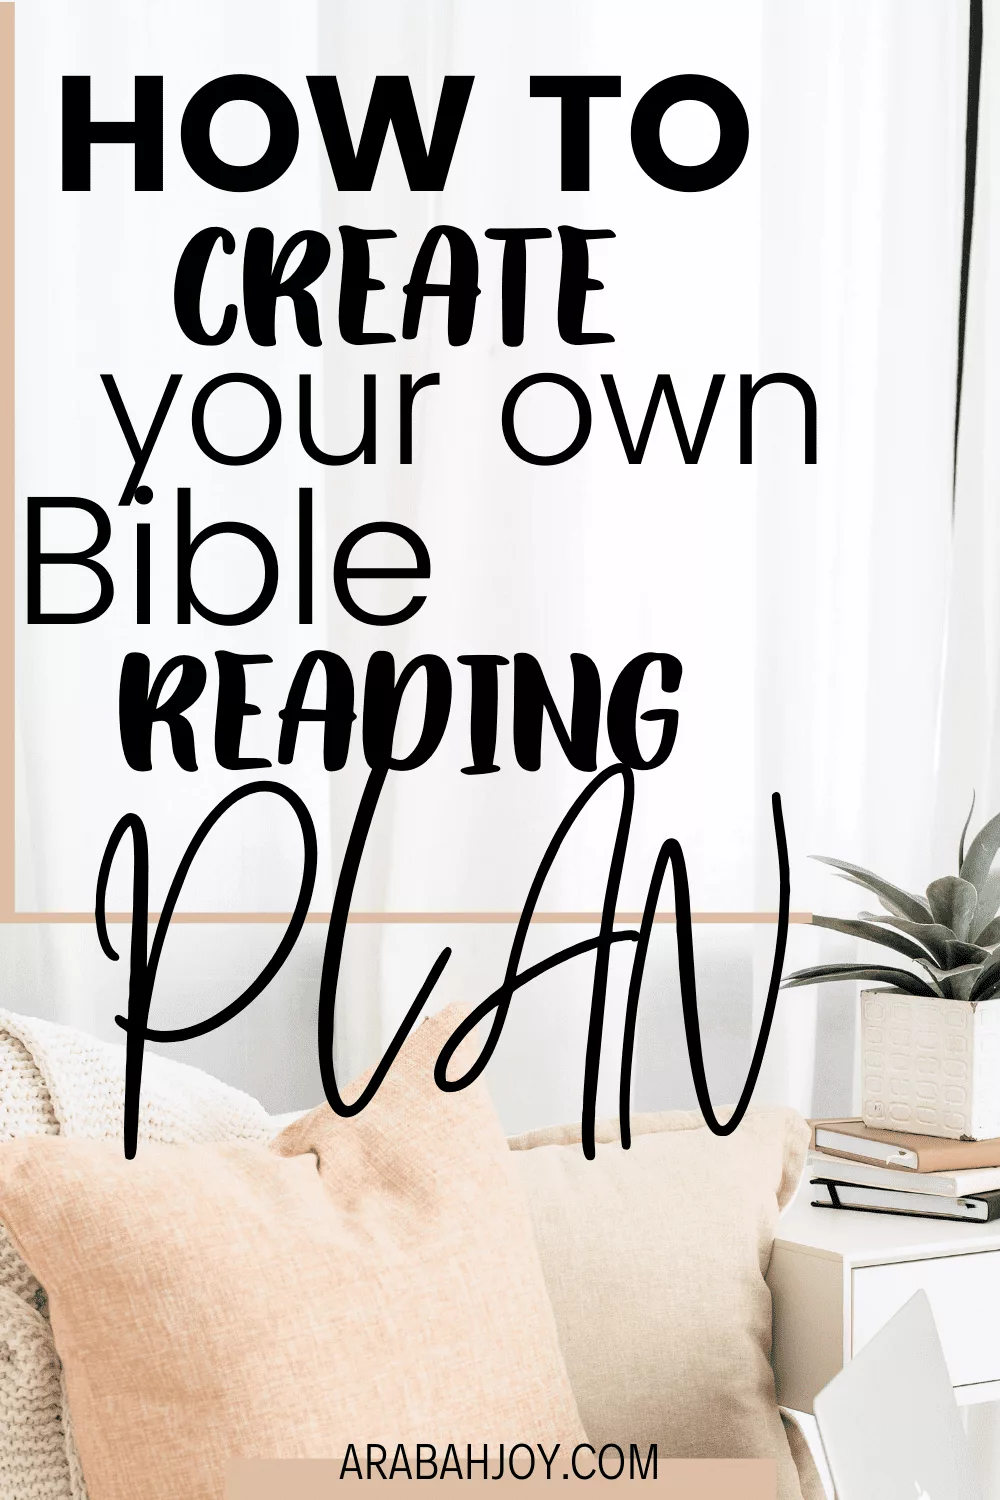 Great tips for choosing or creating your next bible reading plan